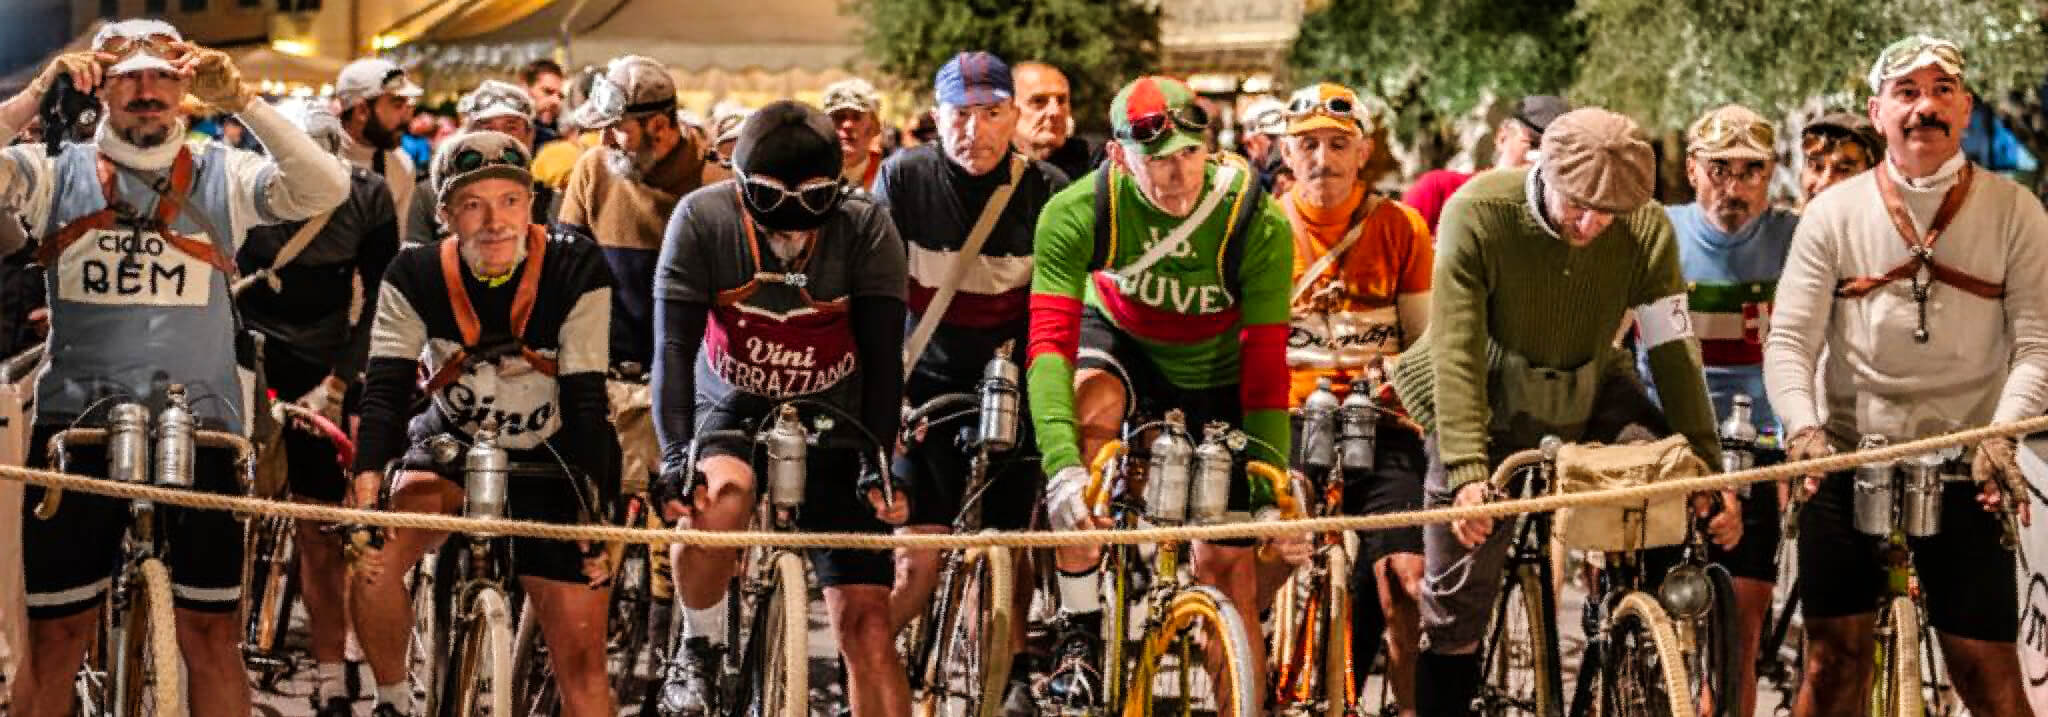 Eroica Bike Tours. Cycling vintage vent in Gaiole in Chianti, Tuscany.